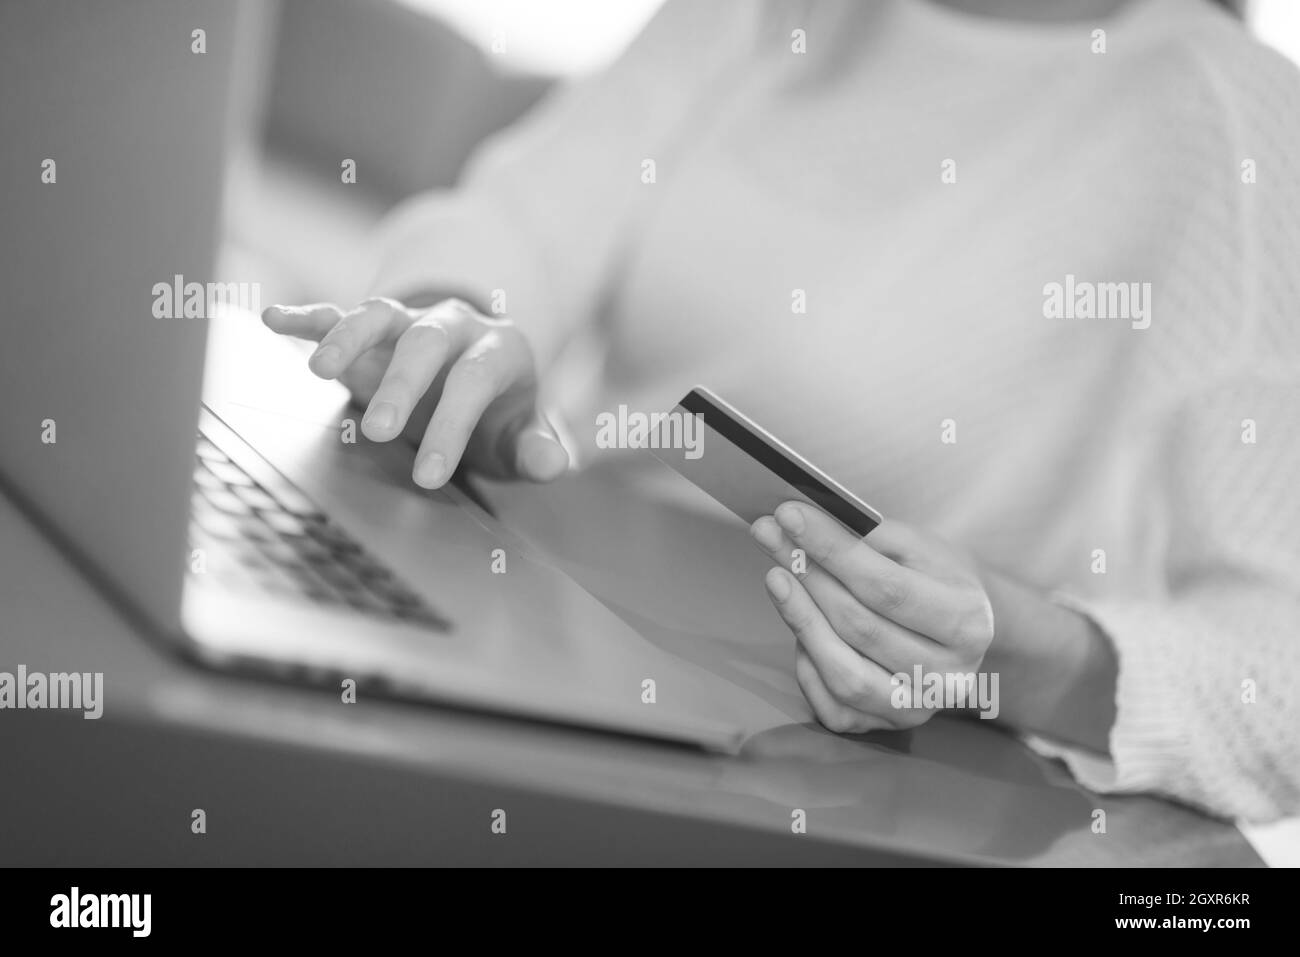 Young woman holding credit card and using laptop computer. Online shopping concept Stock Photo